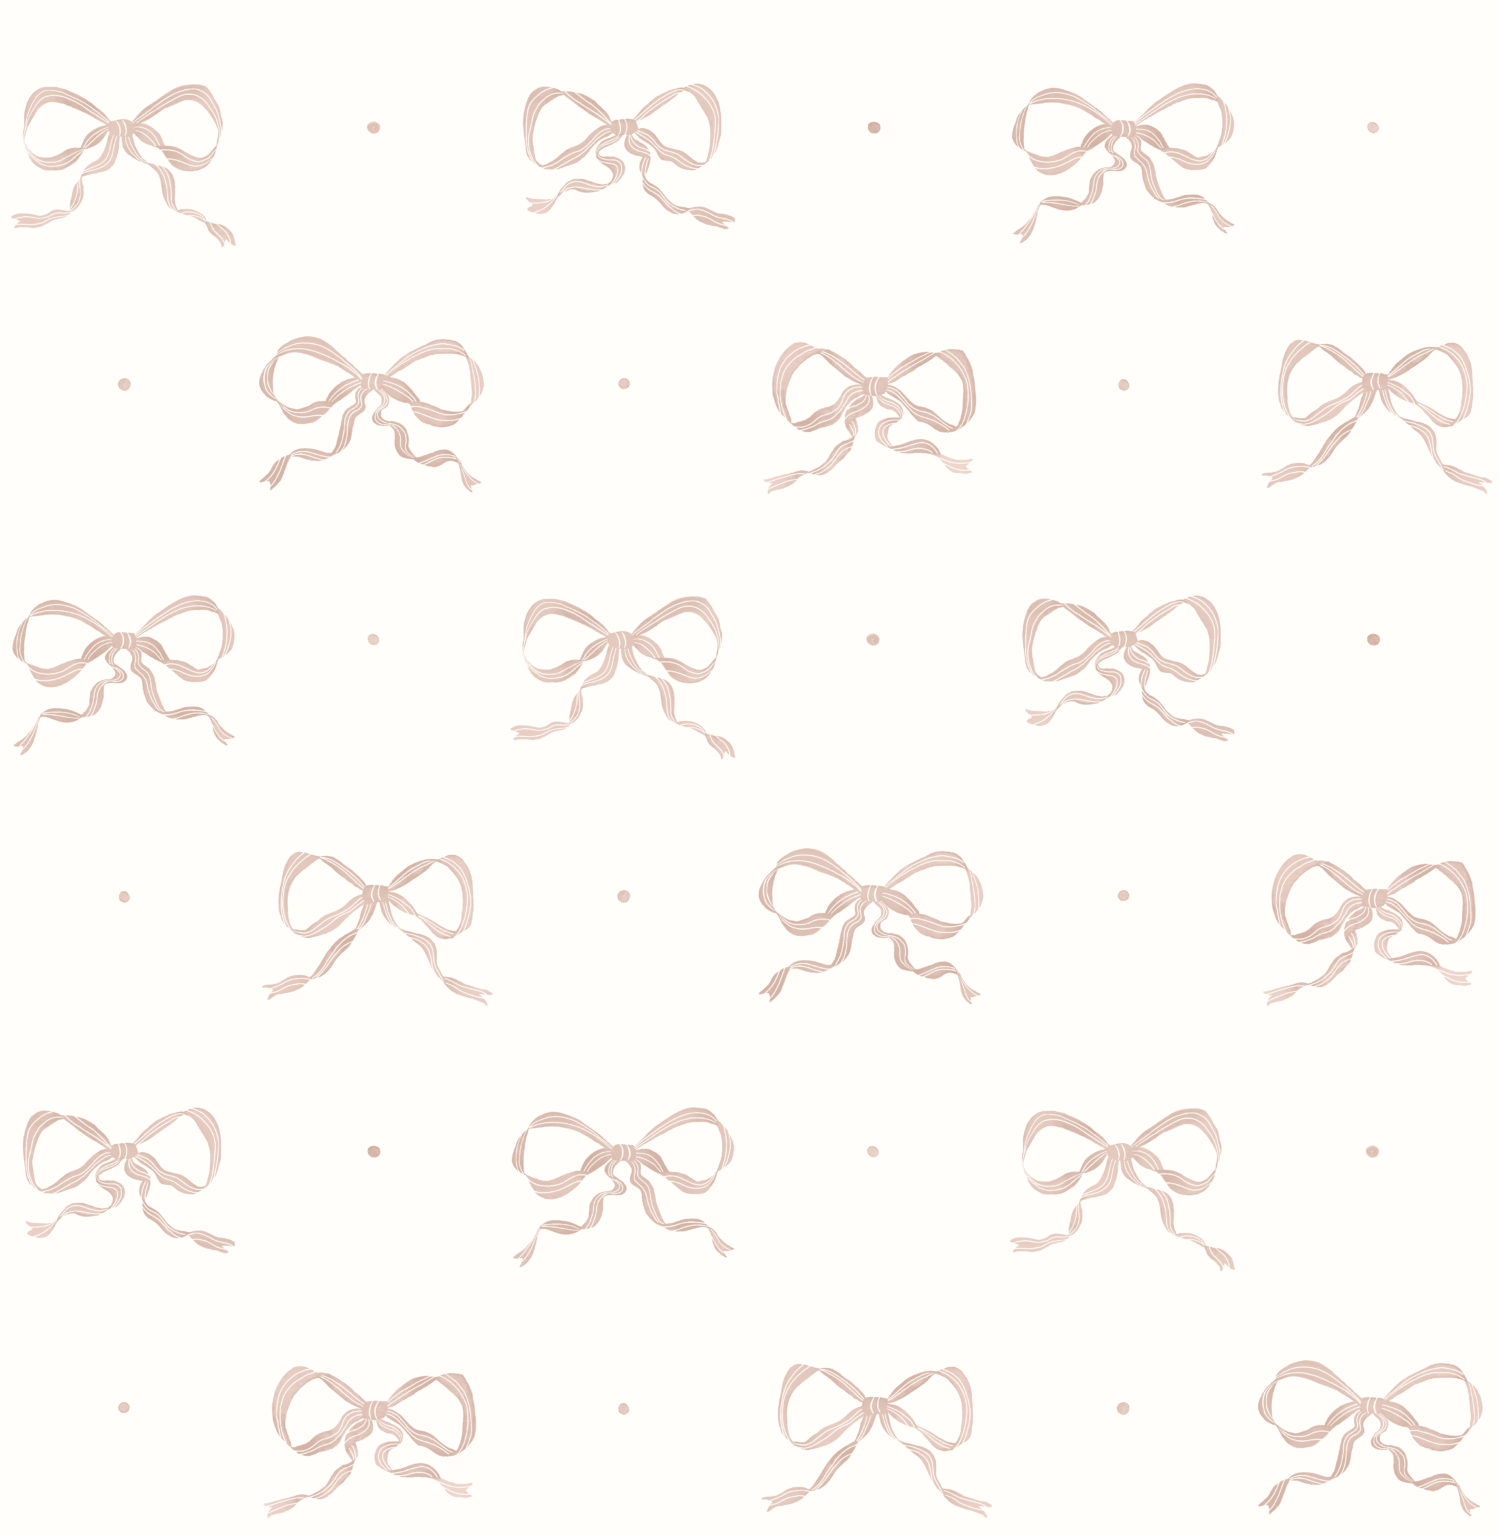 Elements of Style - INTRODUCING ERIN GATES x A STREET PRINTS WALLPAPER!